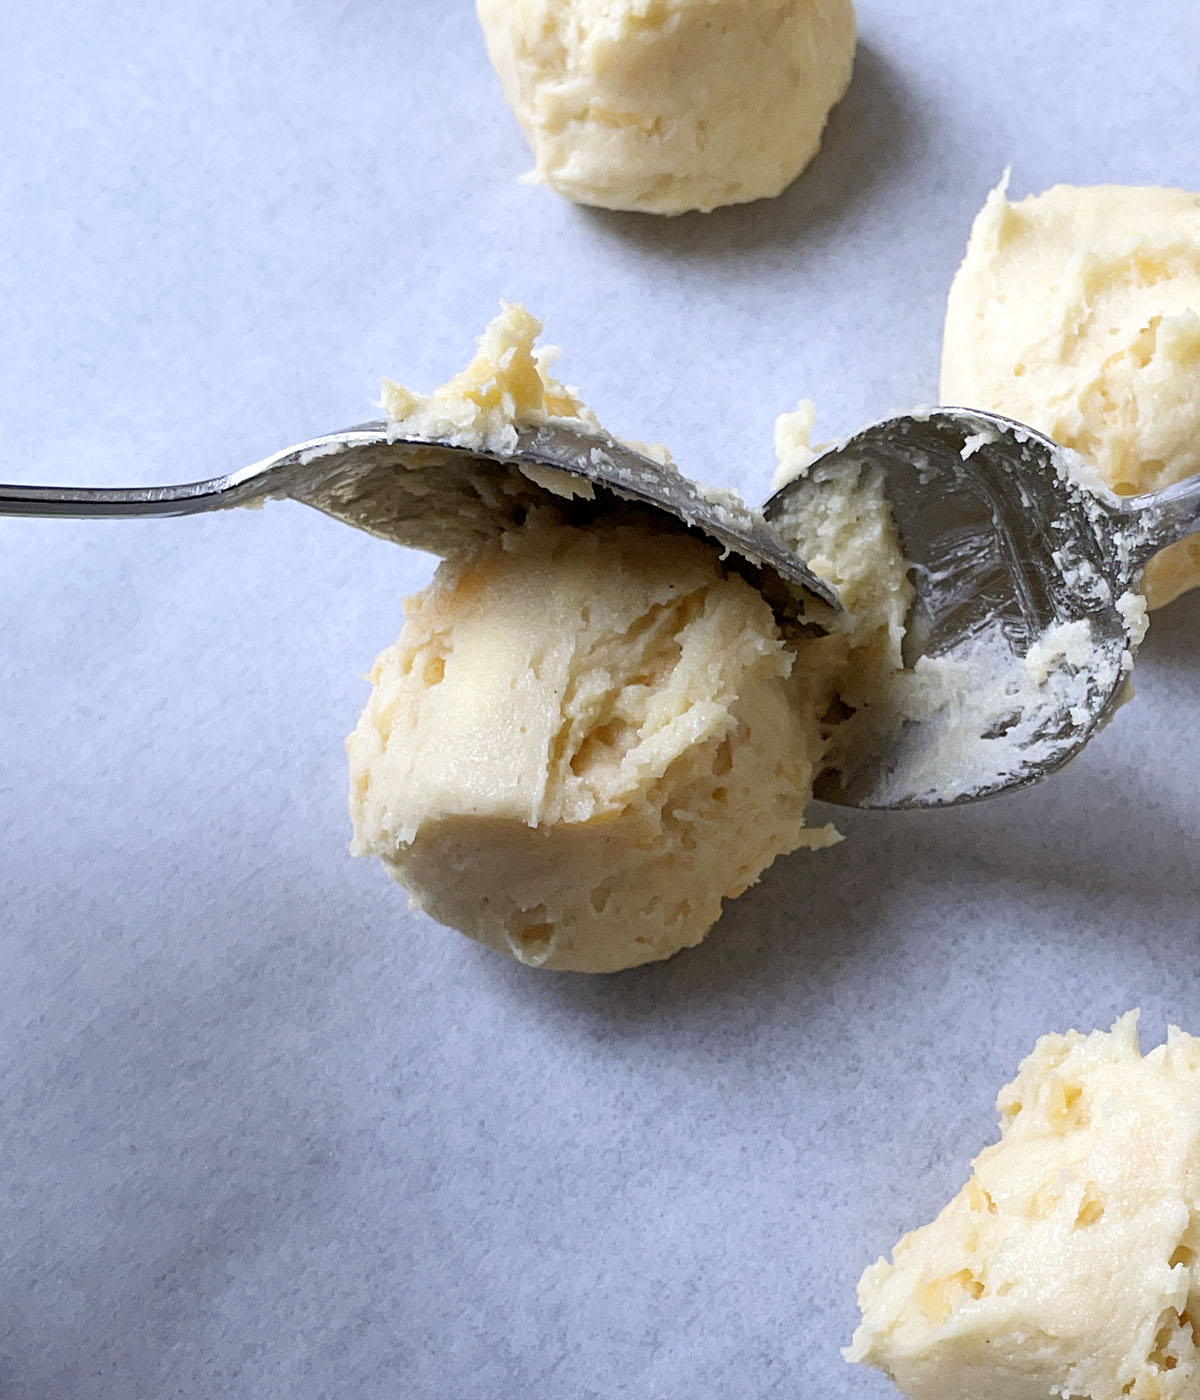 Two spoons place a ball of scone dough on white parchment paper.